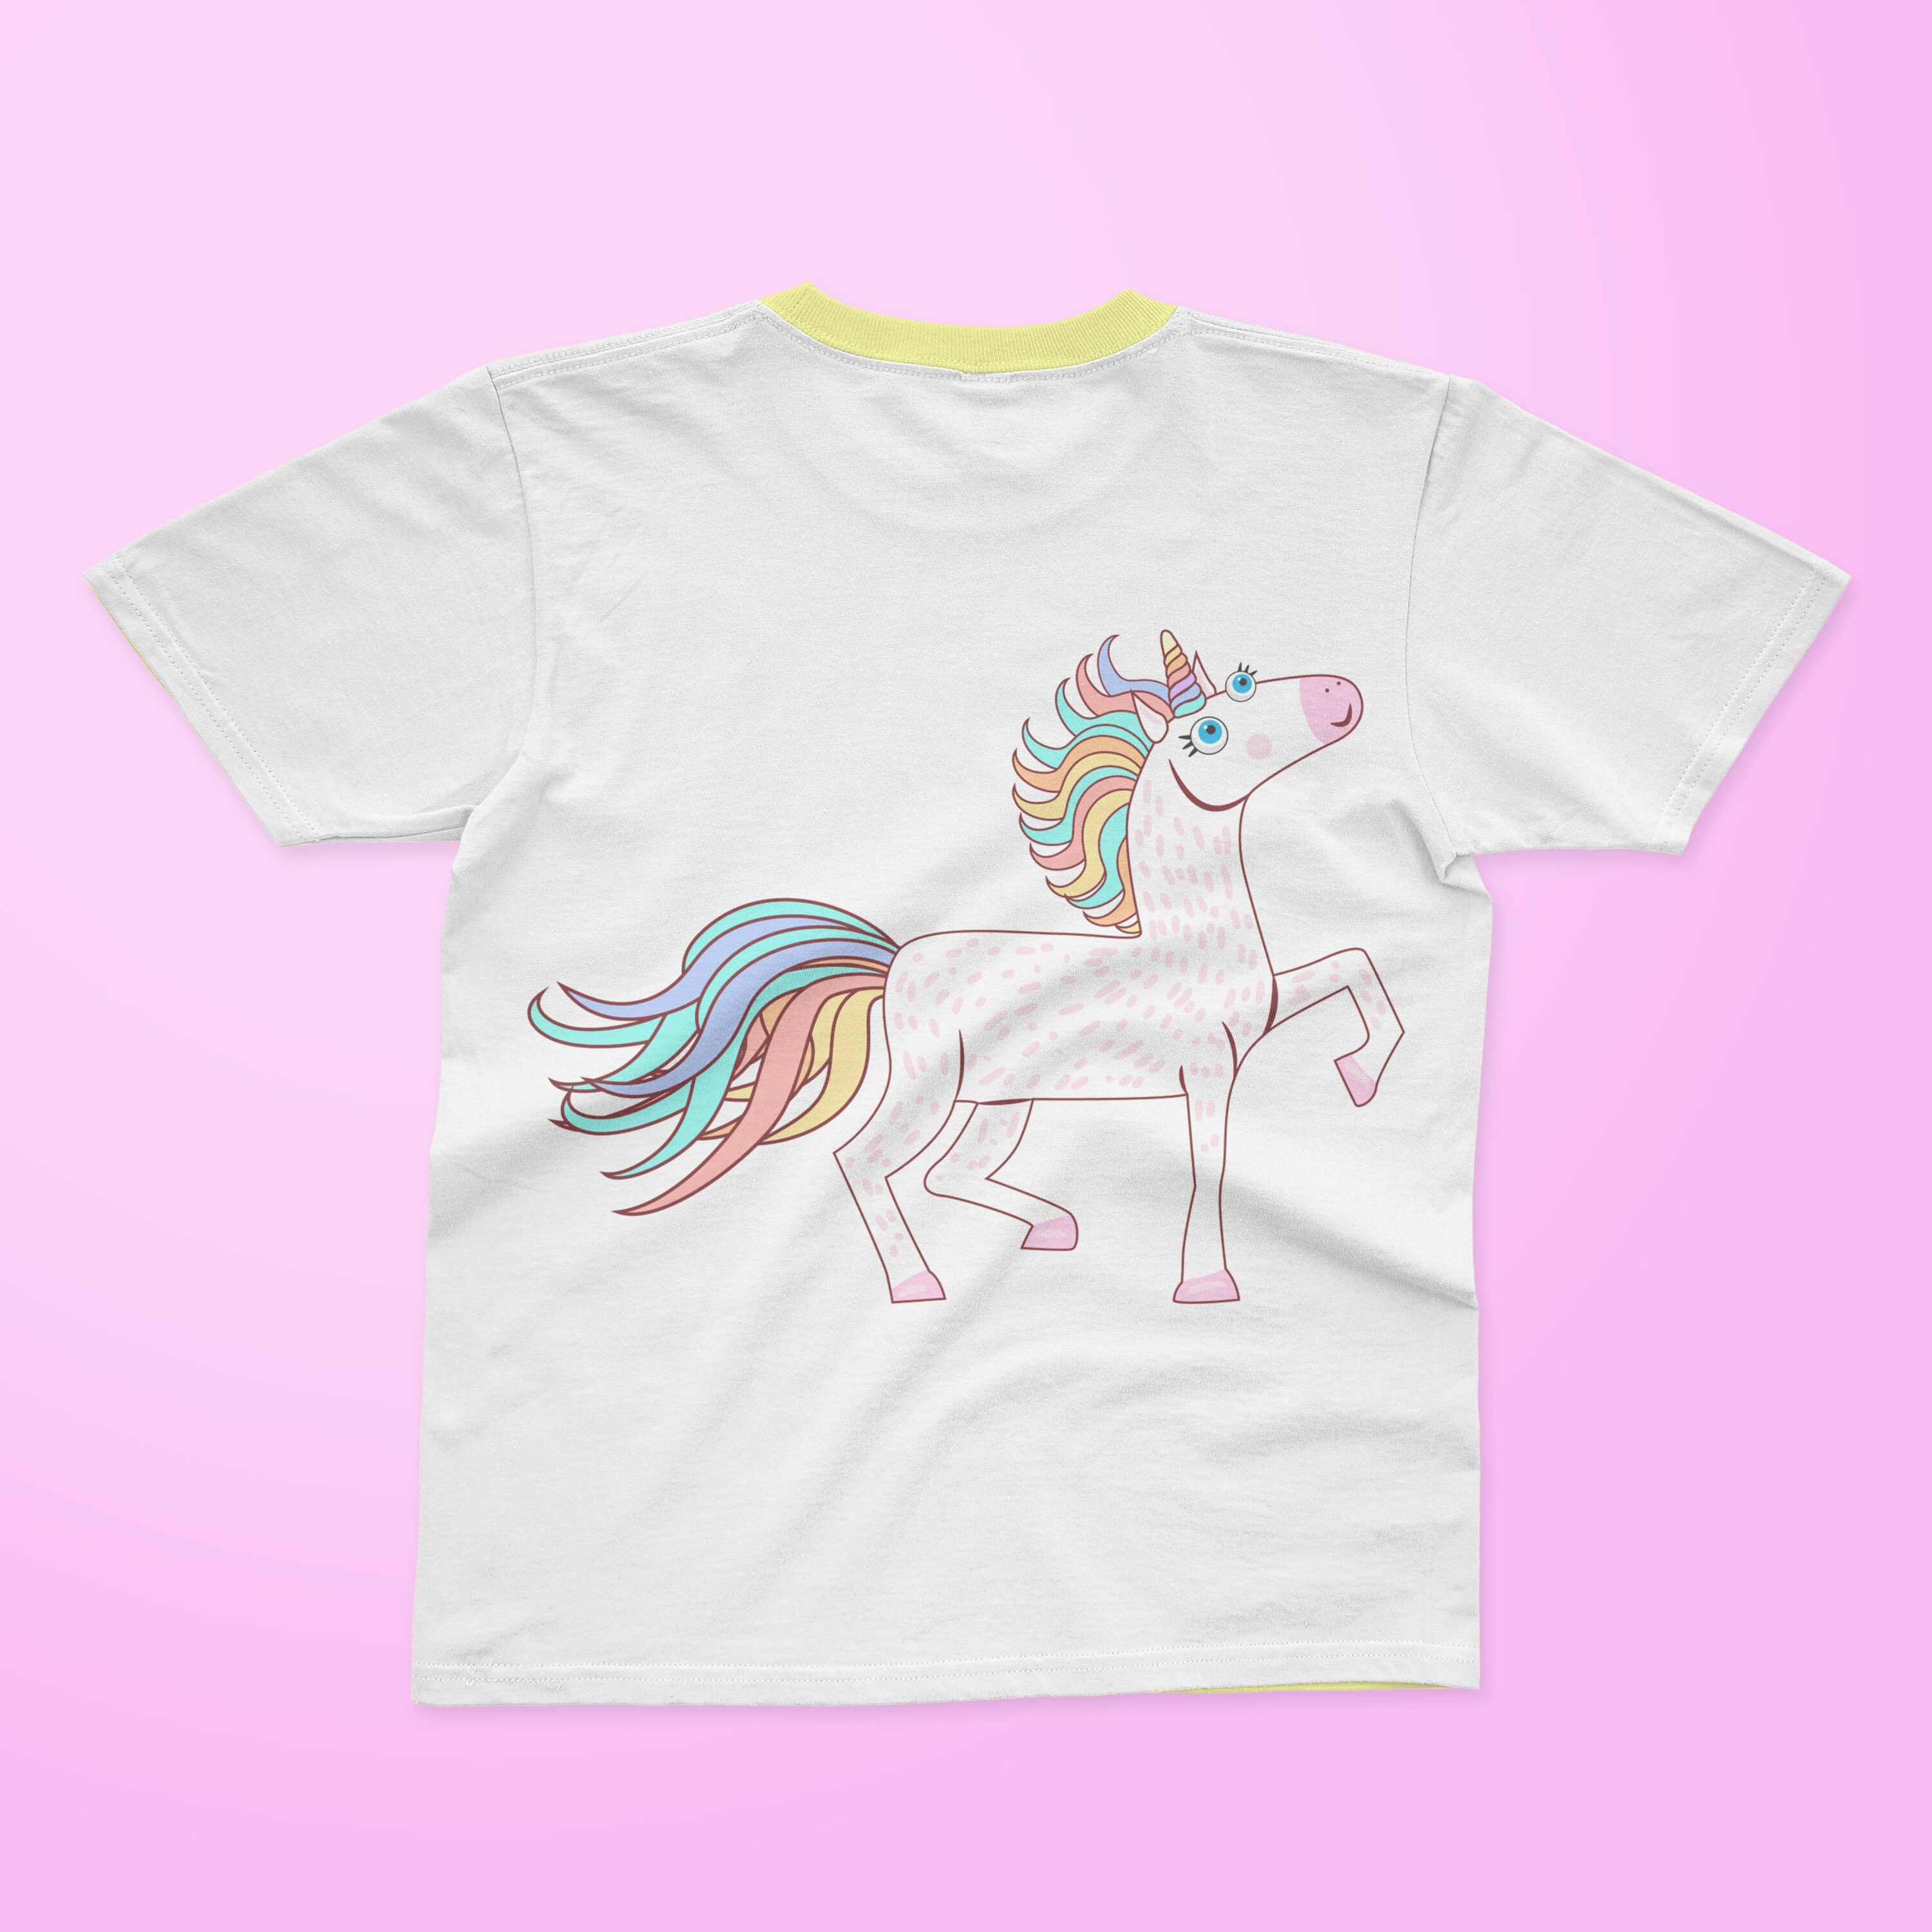 White t-shirt with a yellow collar and a cute unicorn on a pink background.